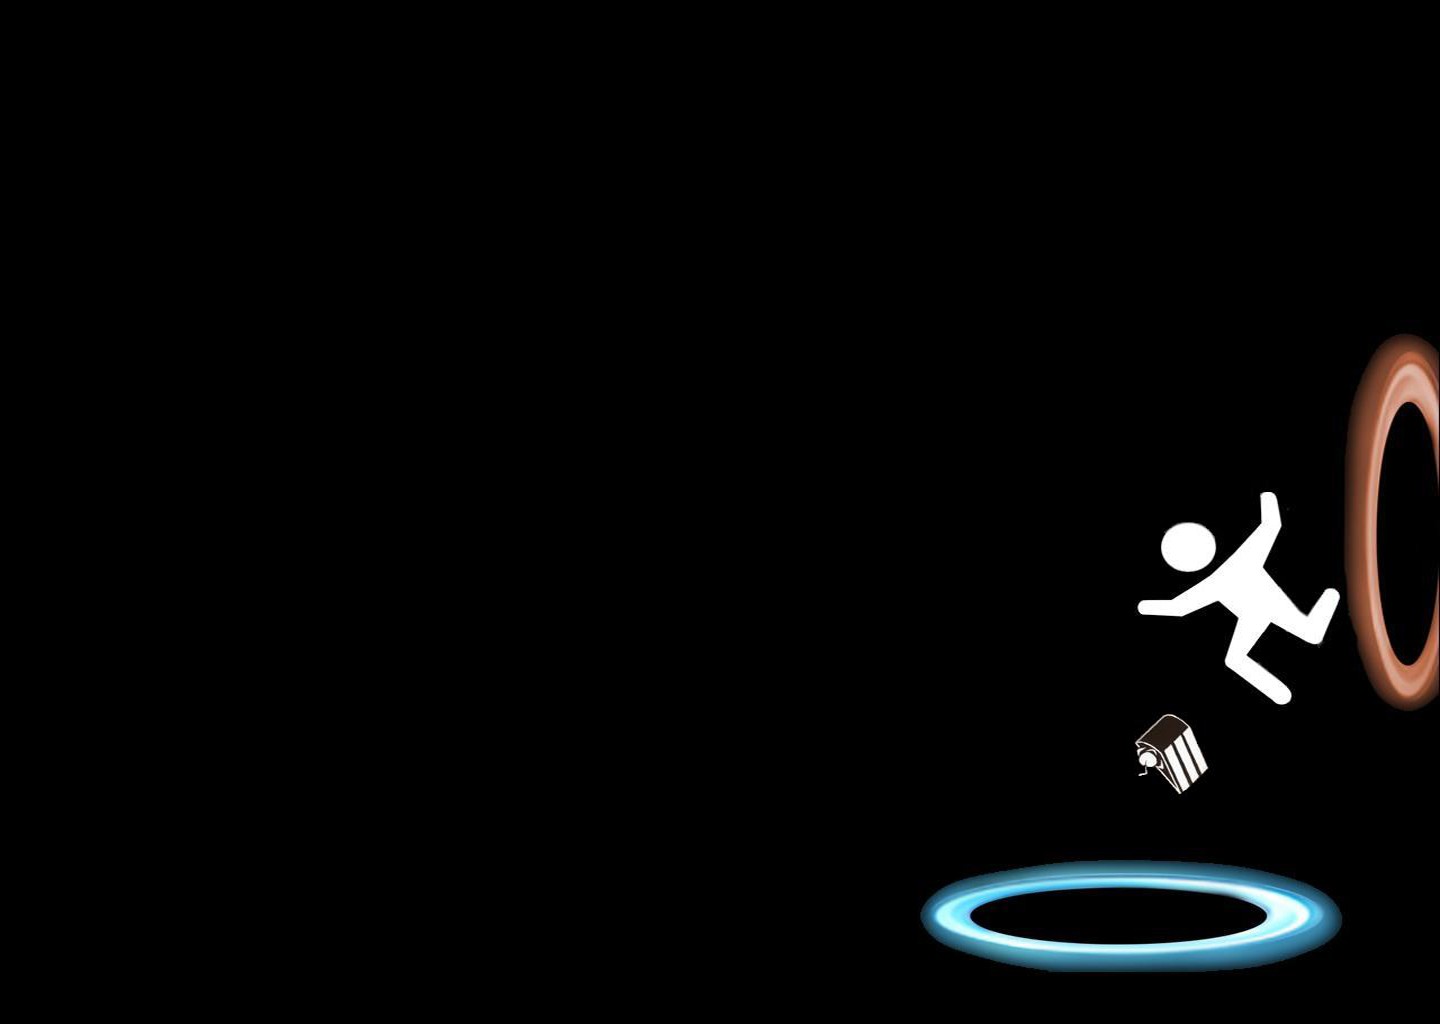 General 1440x1024 Portal (game) video games PC gaming cake simple background video game art black background